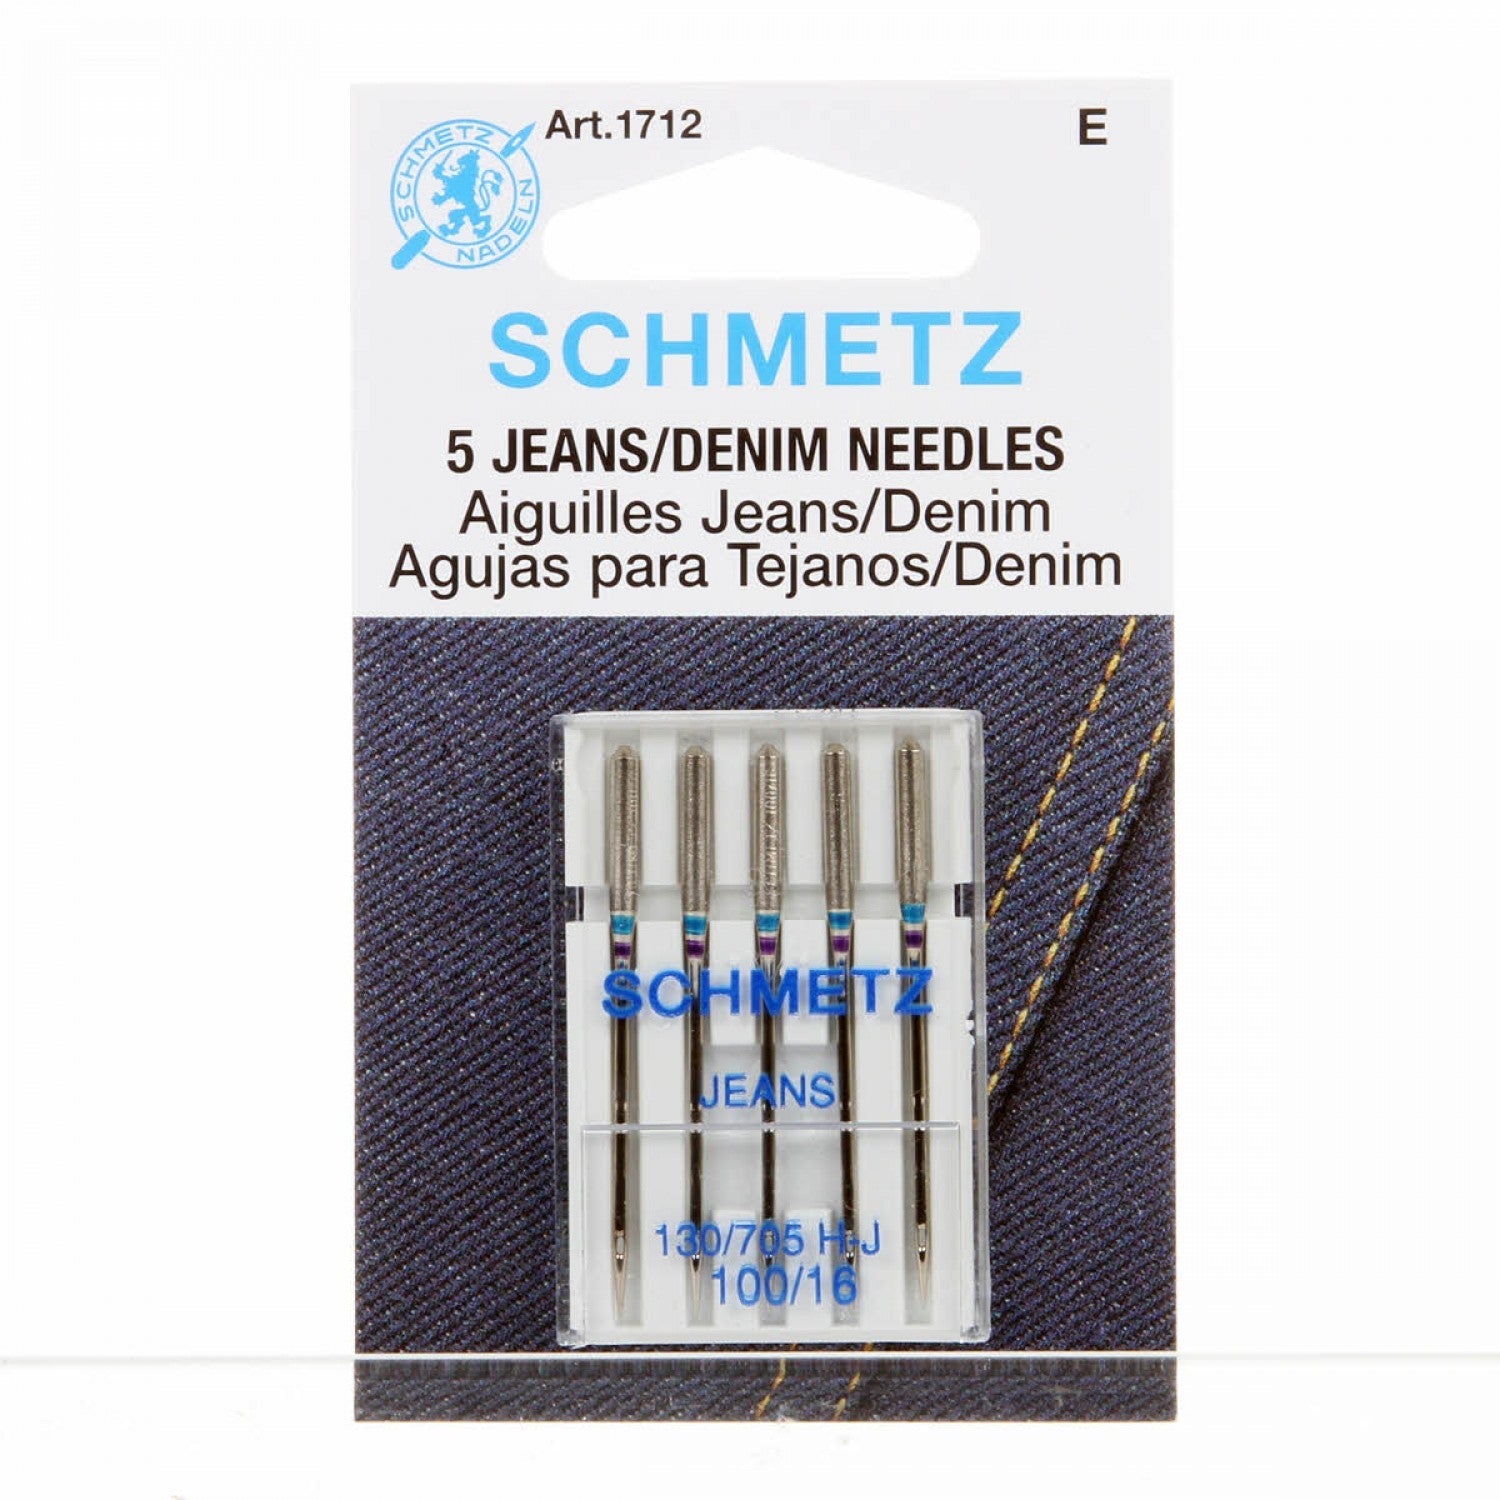 Schmetz Jeans Sewing Machine 5 Needle Pack, 100/16-Notion-Spool of Thread